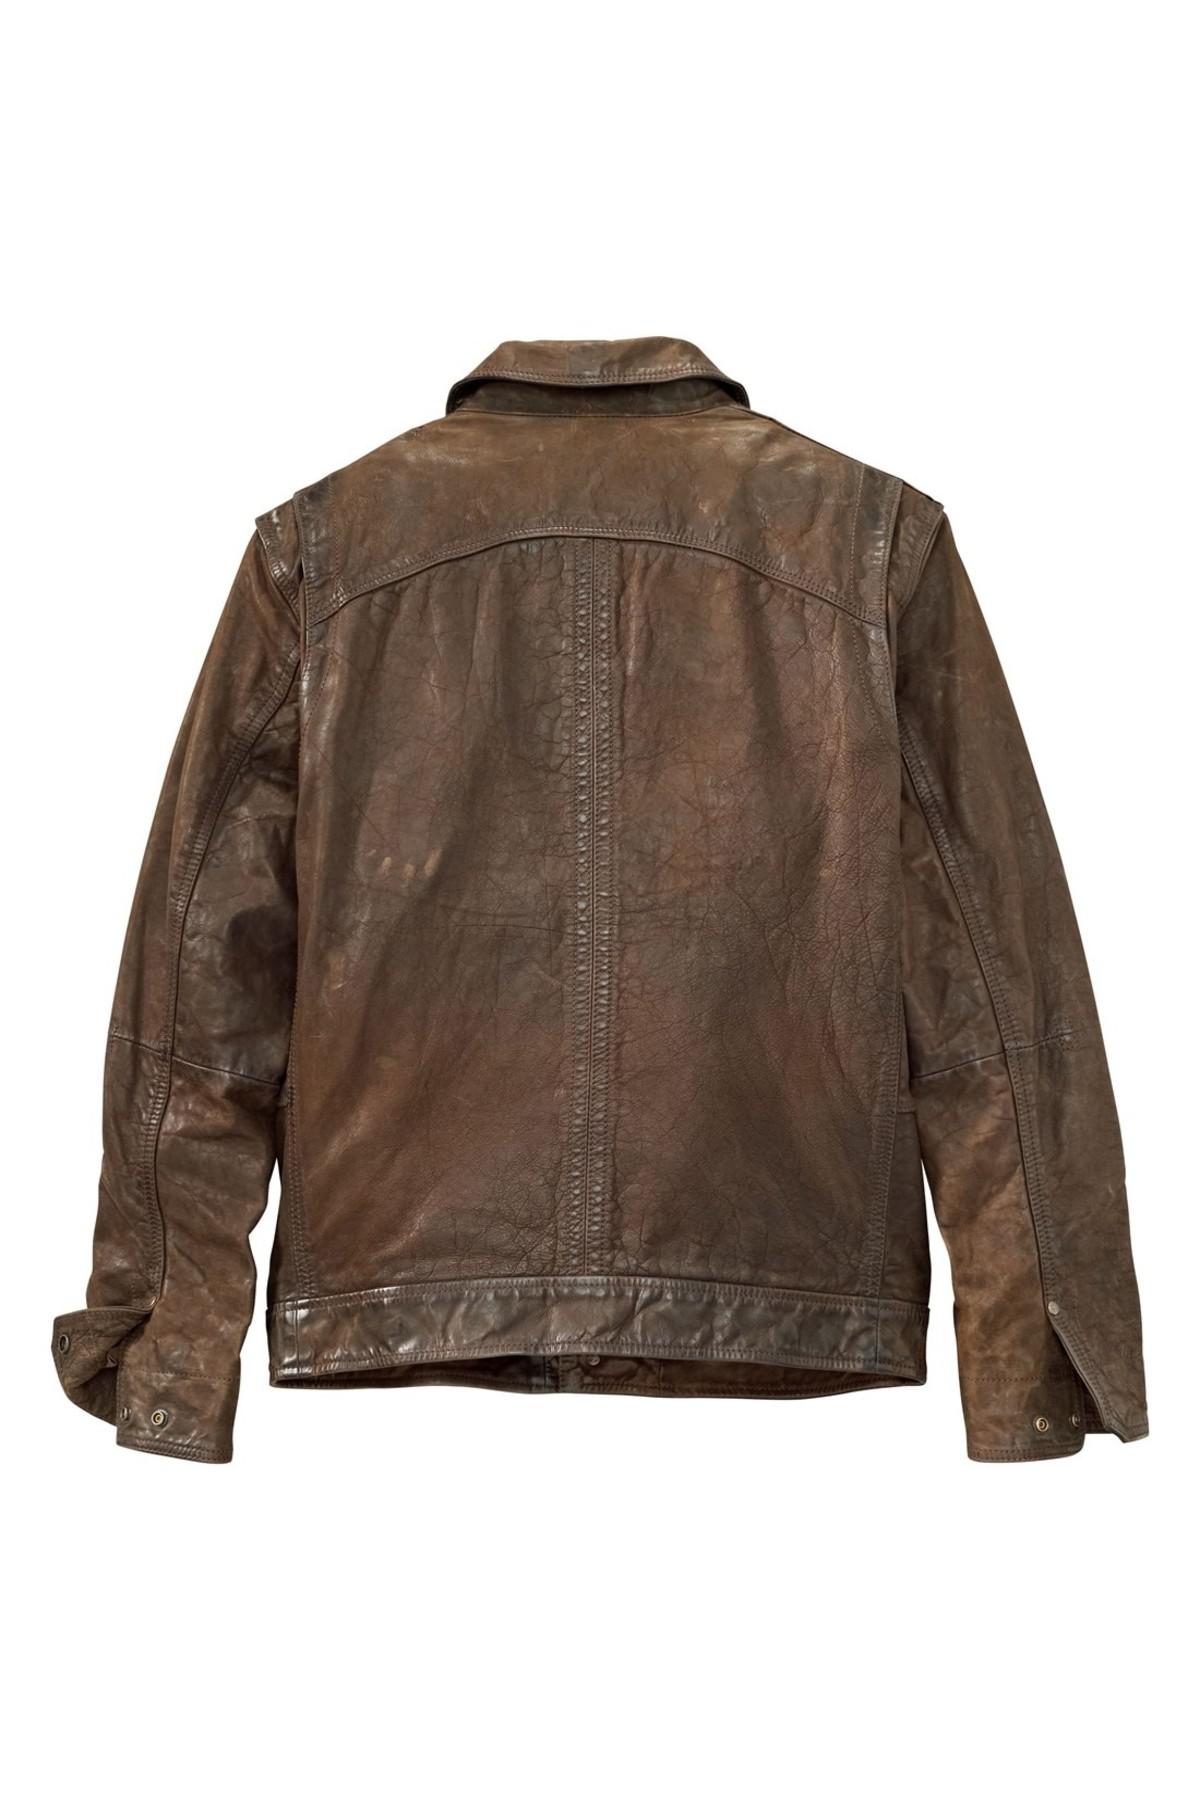 Timberland 'tenon' Leather Jacket in Cocoa (Brown) for Men - Lyst